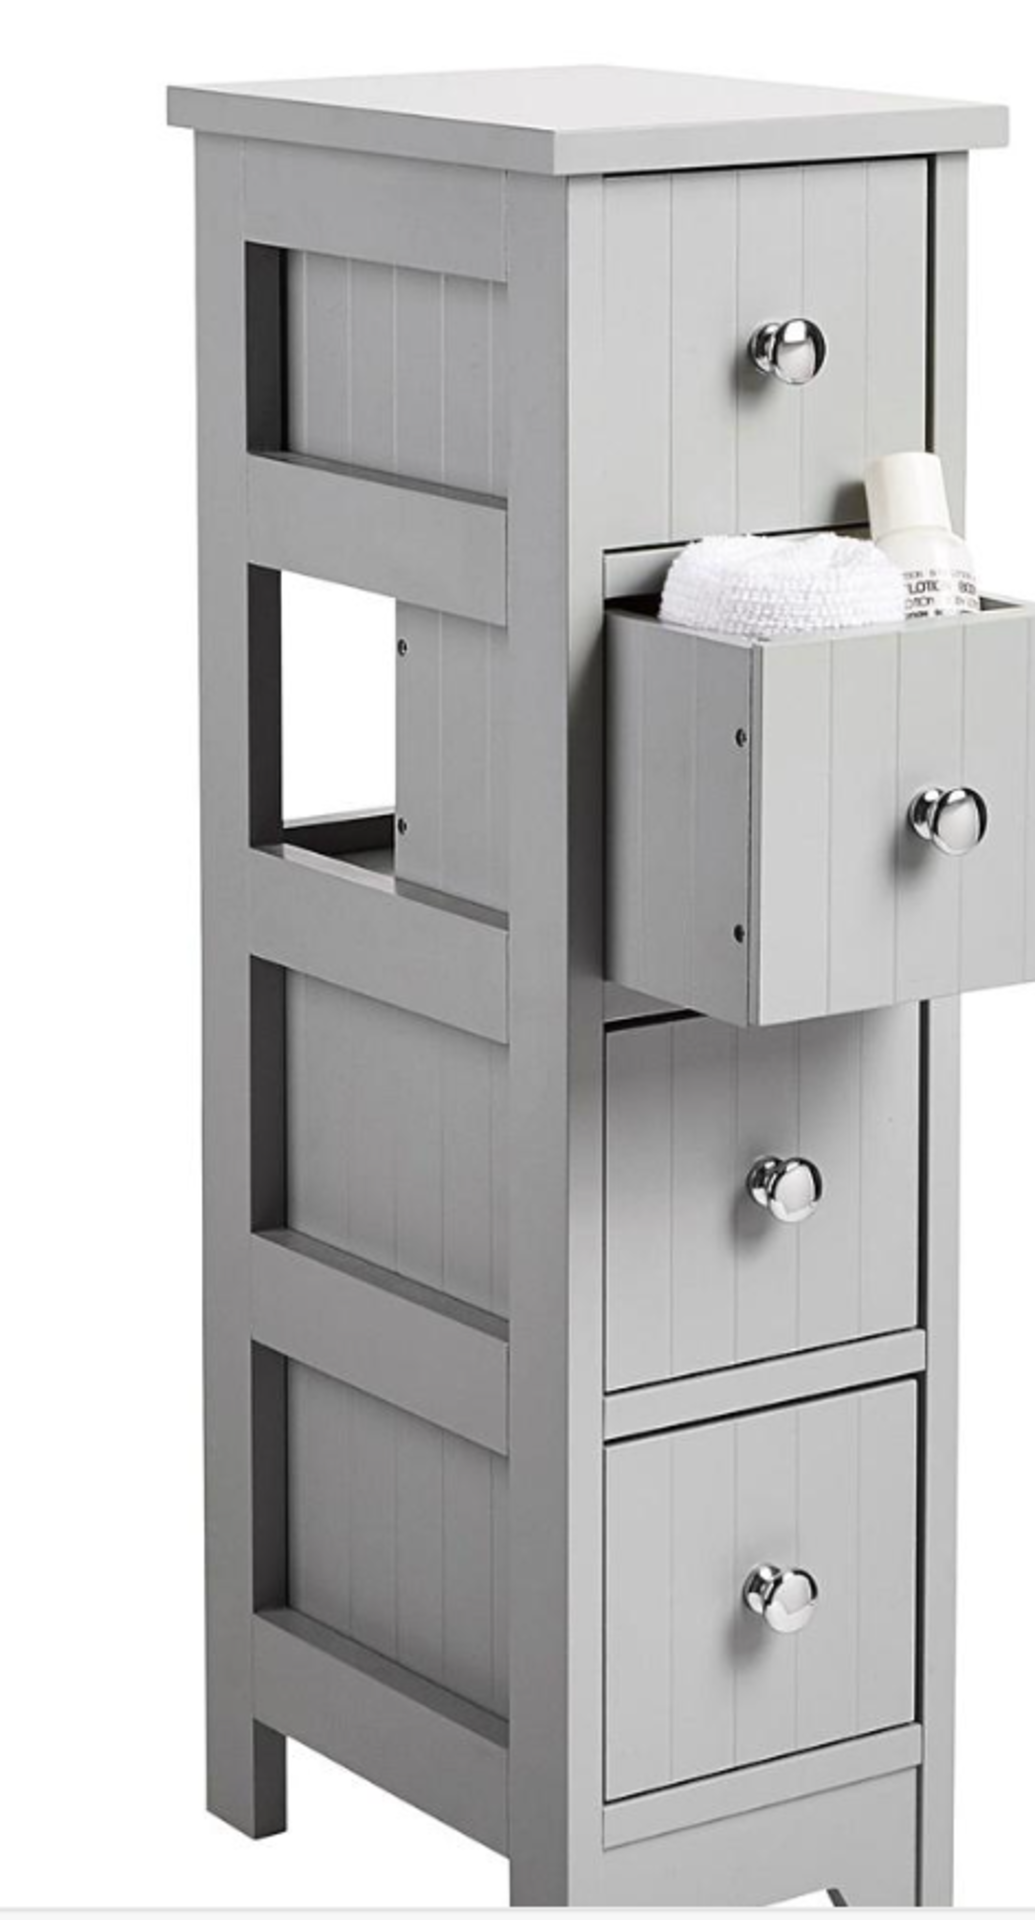 New England 4-Drawer Unit. - ER20. This cleverly designed slimline 4-drawer unit is ideal for neatly